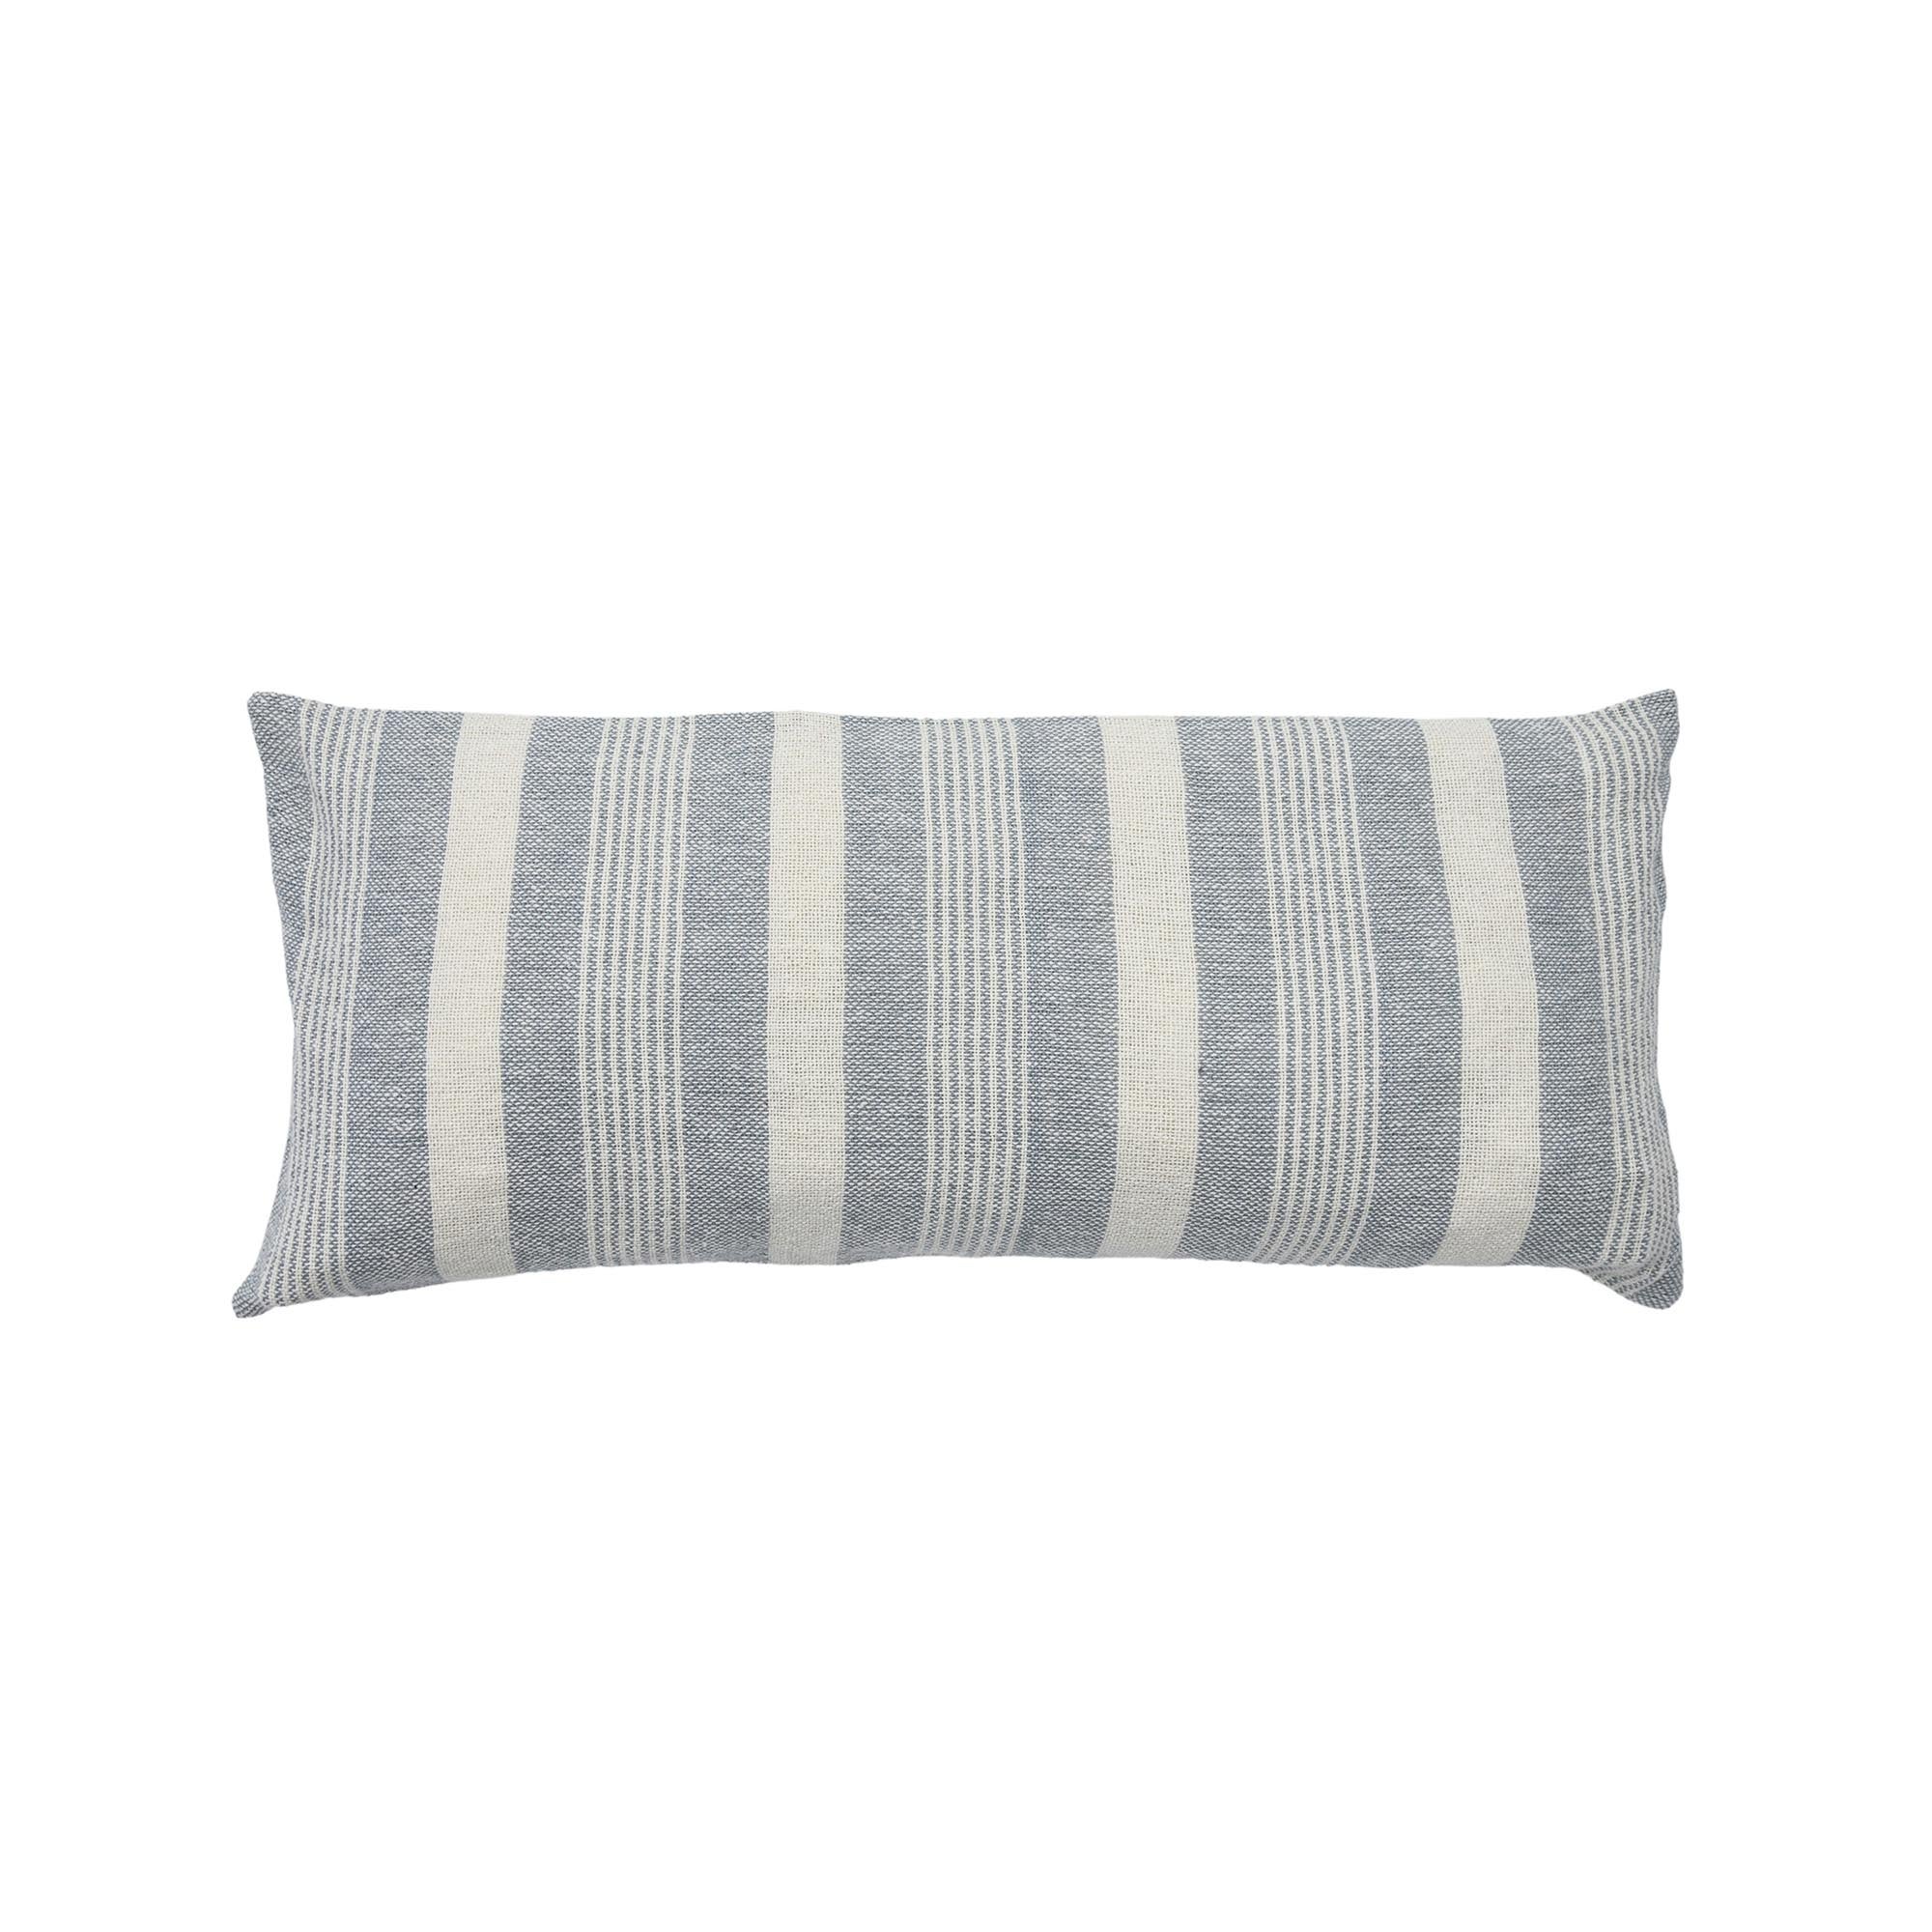 Discover Dunelm's Cushion Range Today | Dunelm | Page 6